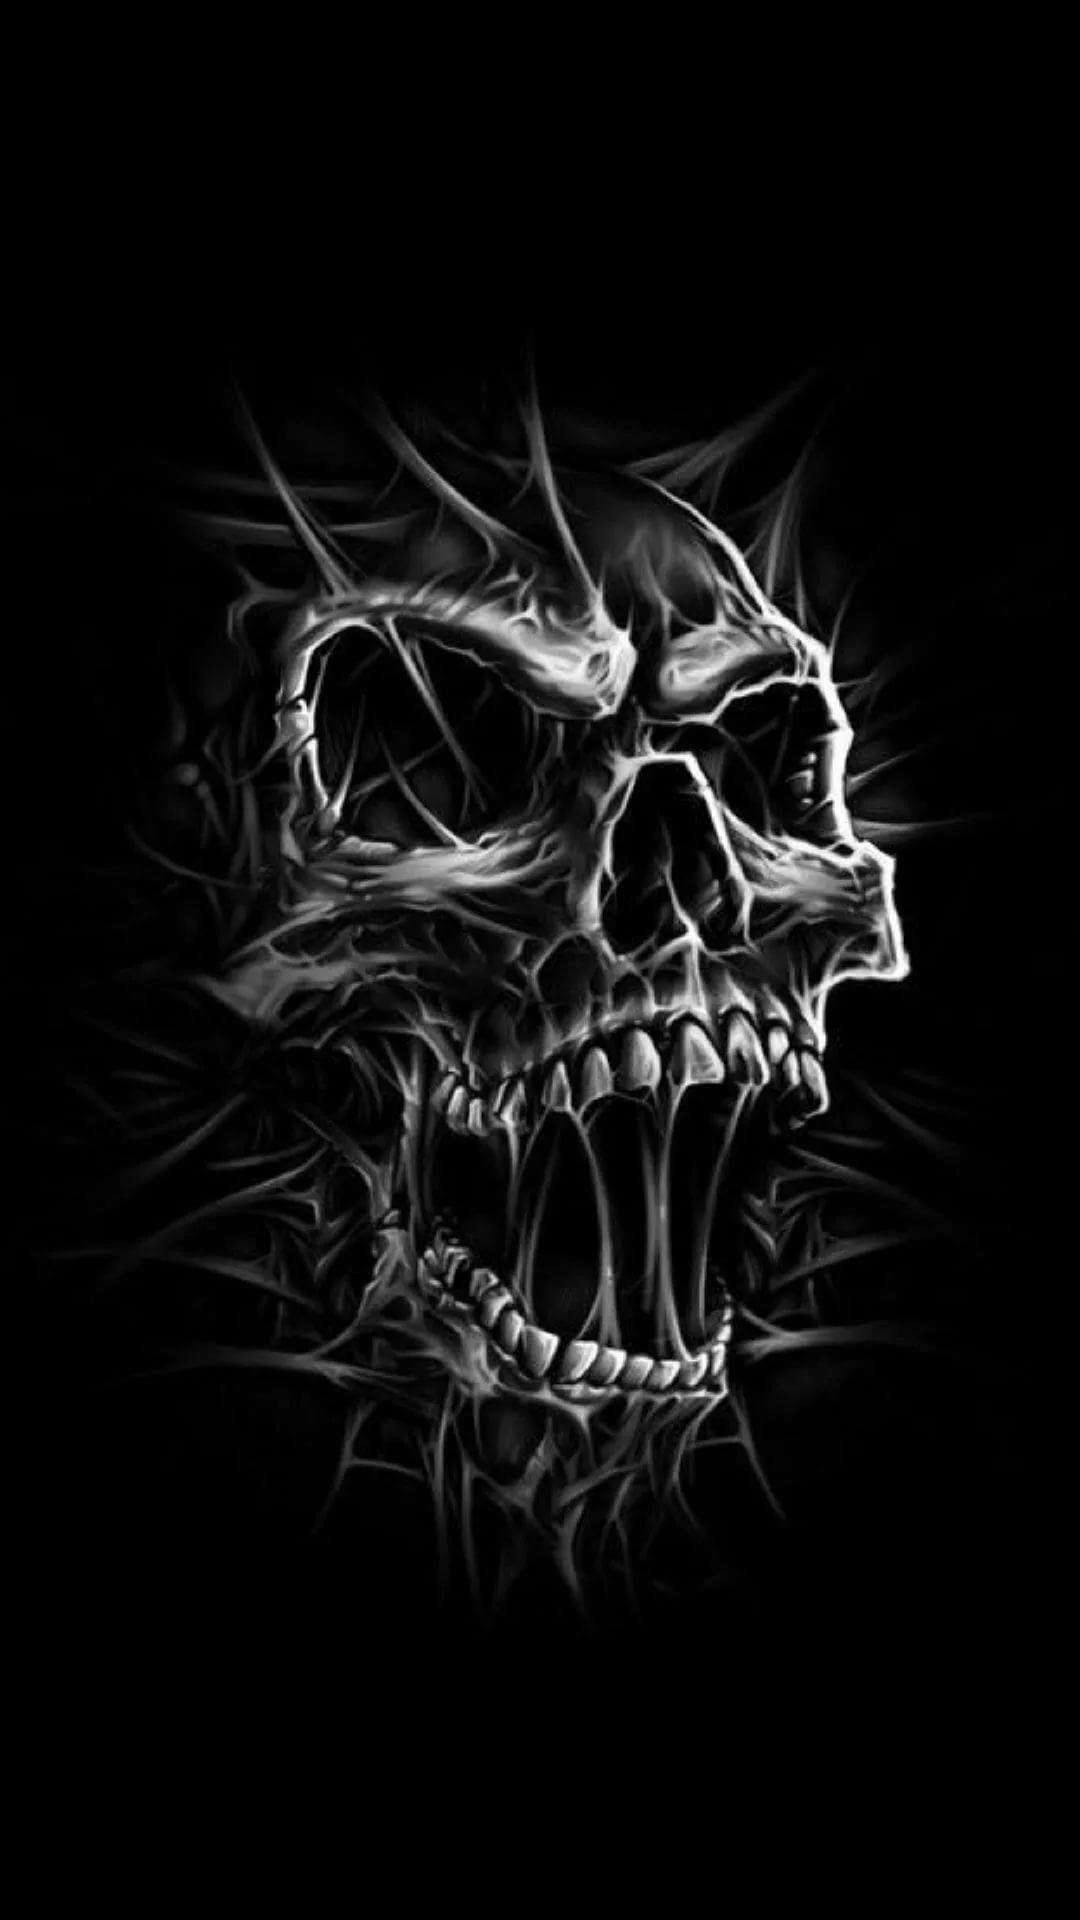 Cool Skull Iphone Wallpapers Top Free Cool Skull Iphone Backgrounds Wallpaperaccess